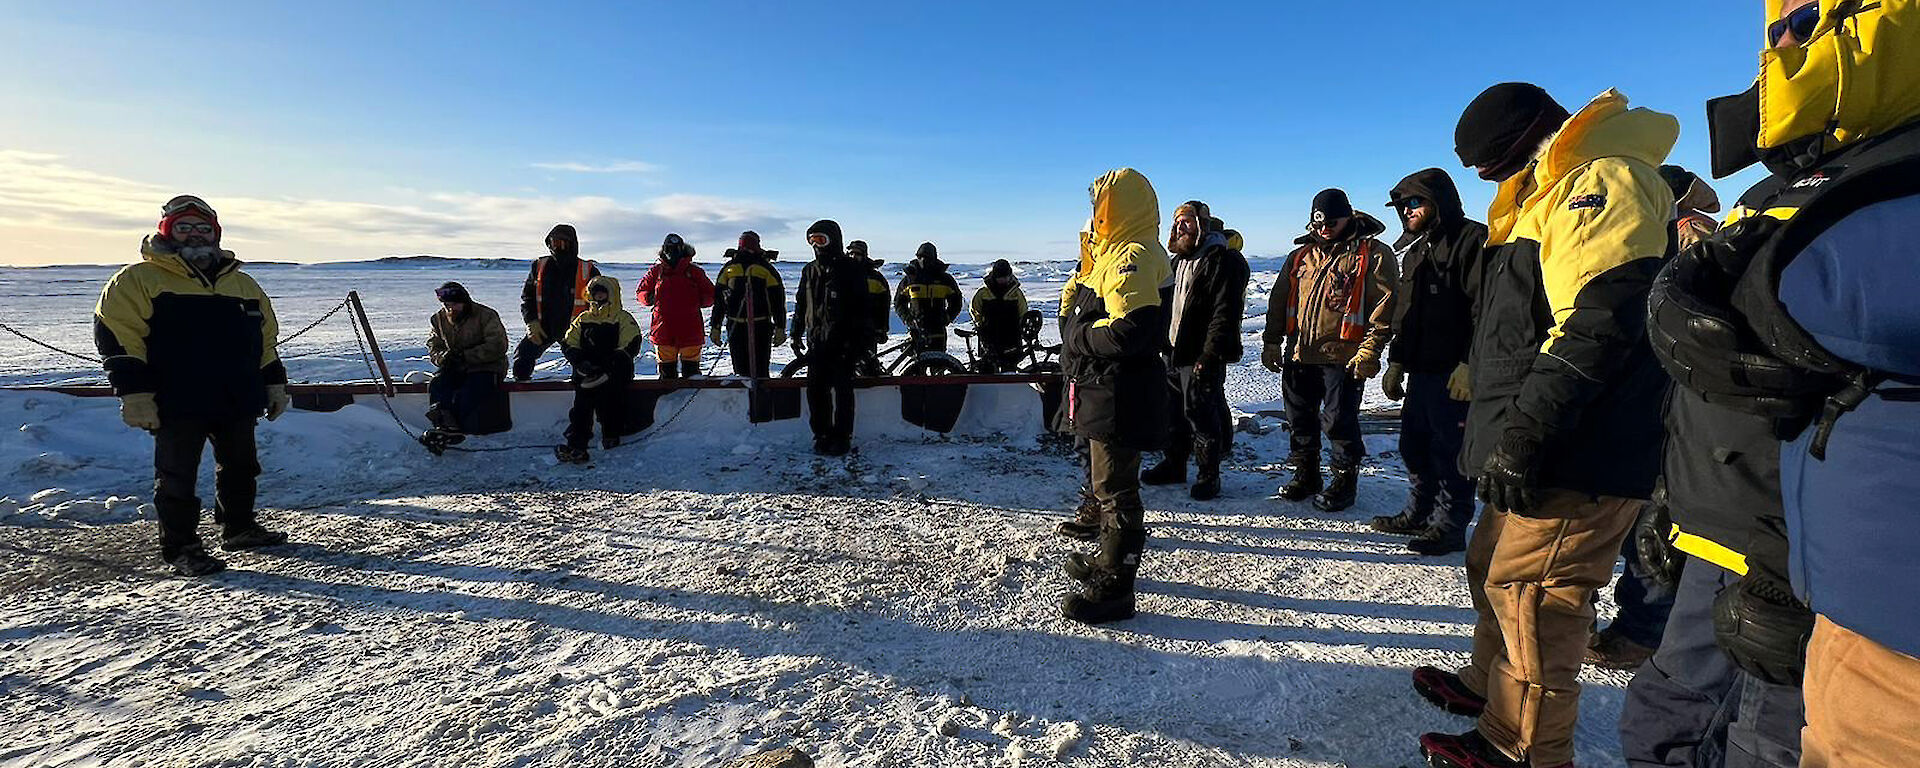 An outdoor gathering of expeditioners